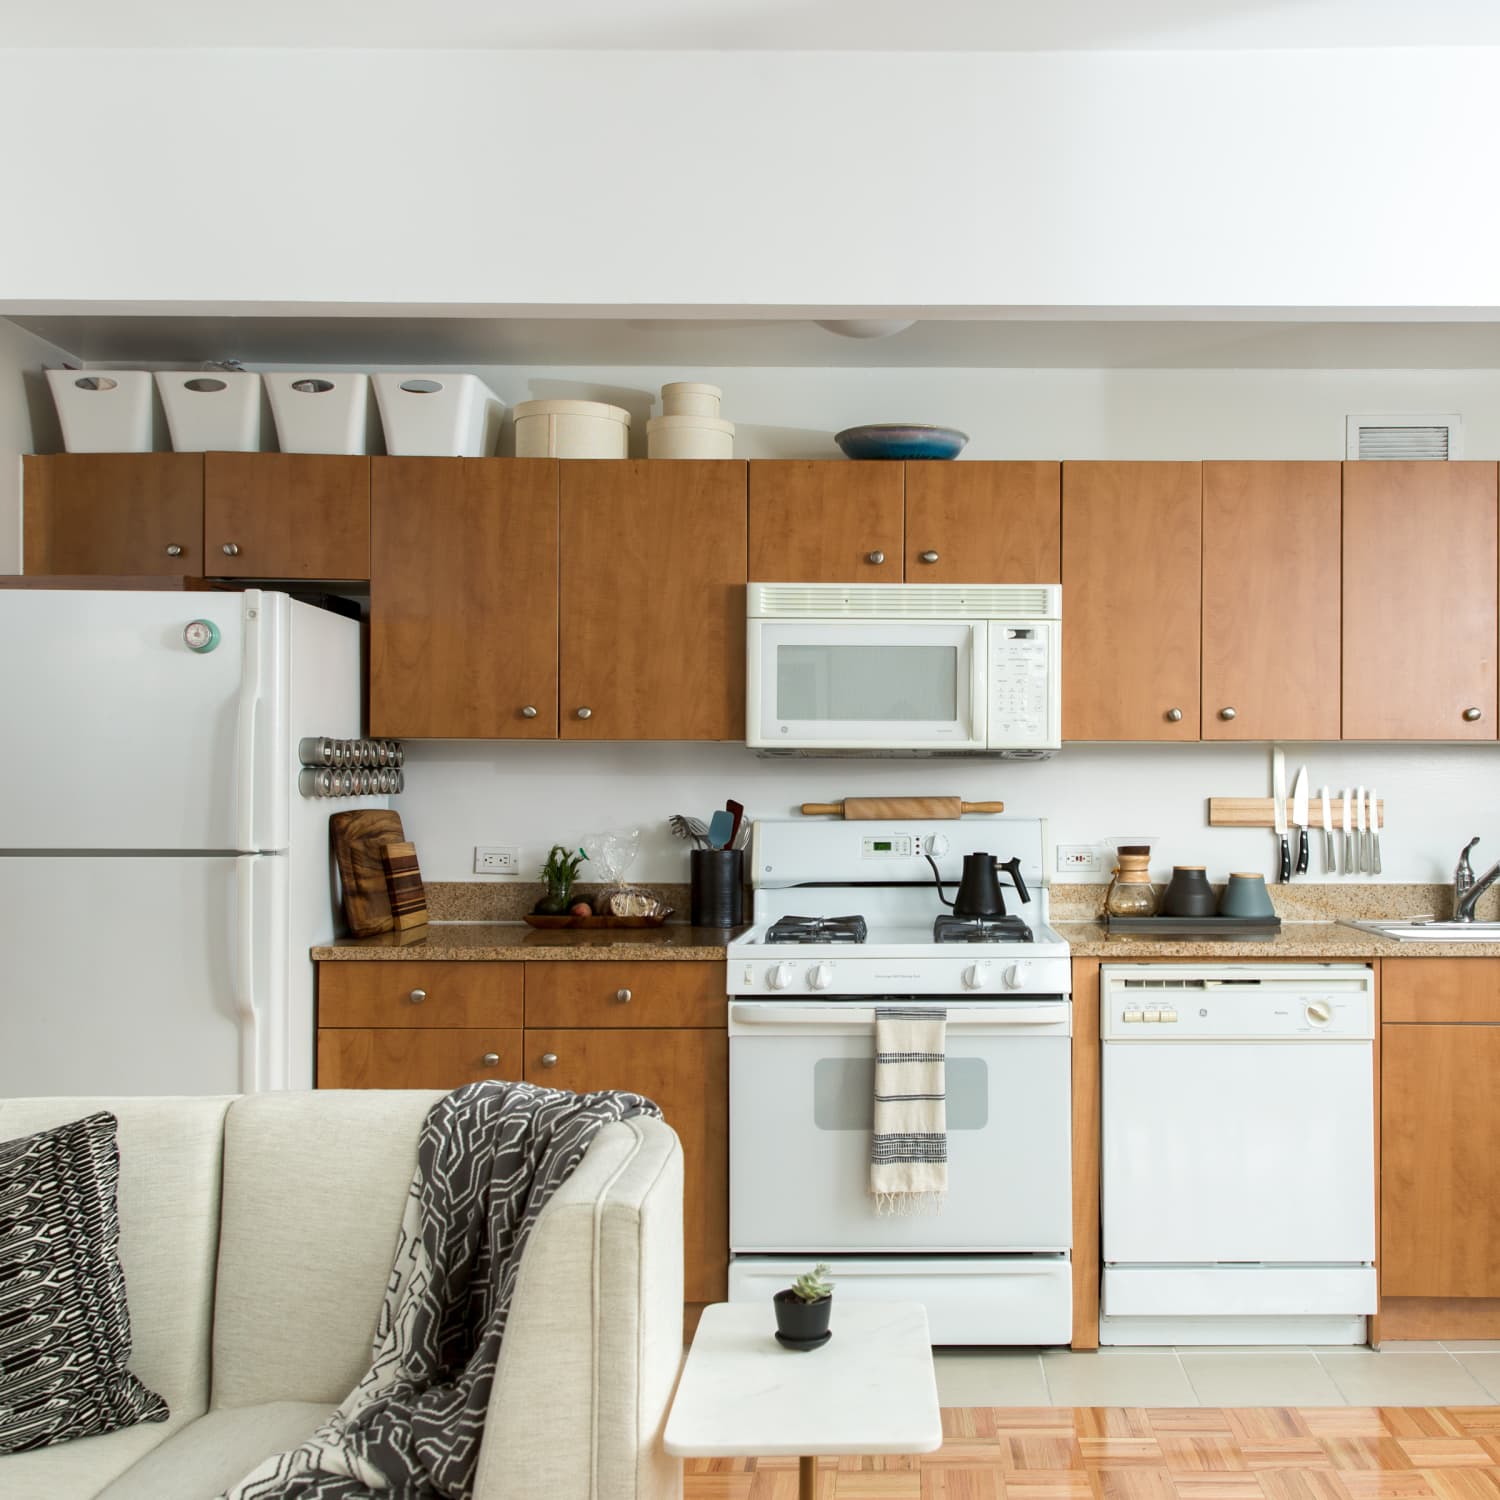 What does a NYC landlord have to provide to apartment tenants?